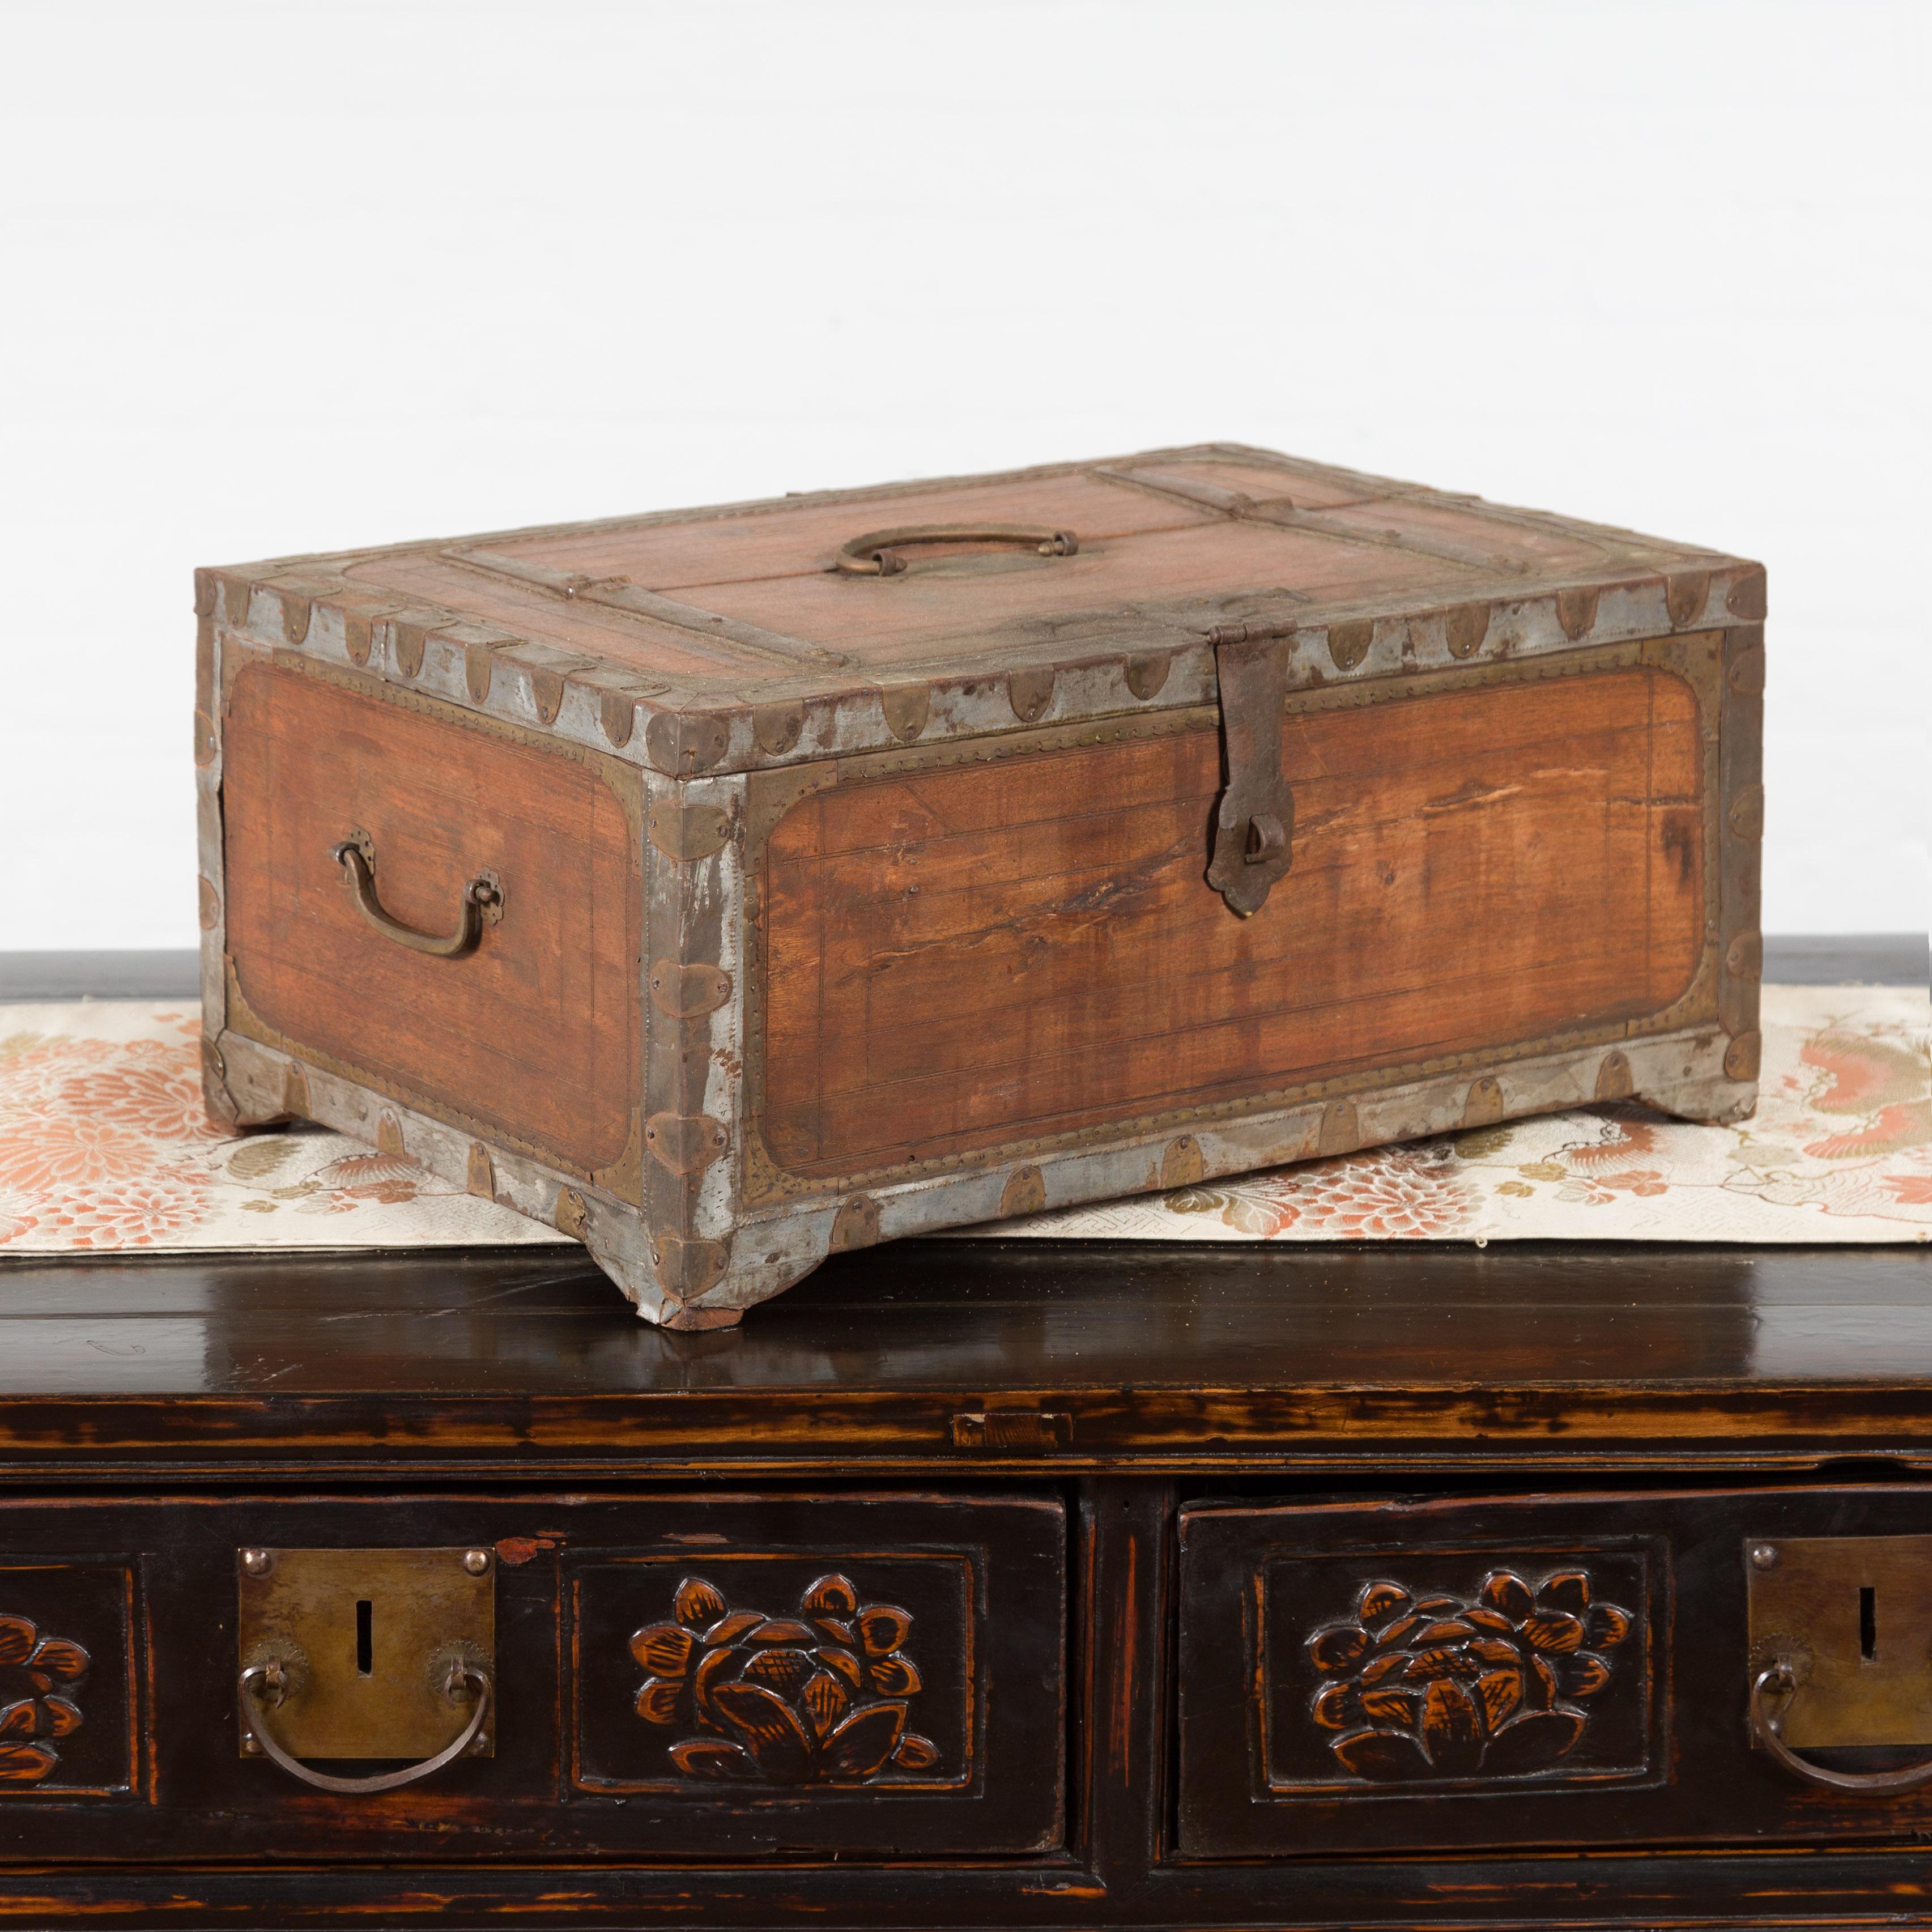 An antique Indian wooden box from the 19th century, with brass details and weathered appearance. Topped with a rectangular lid fitted with a c-scroll handle and half opening to reveal a small distressed interior with side partitioned compartment,